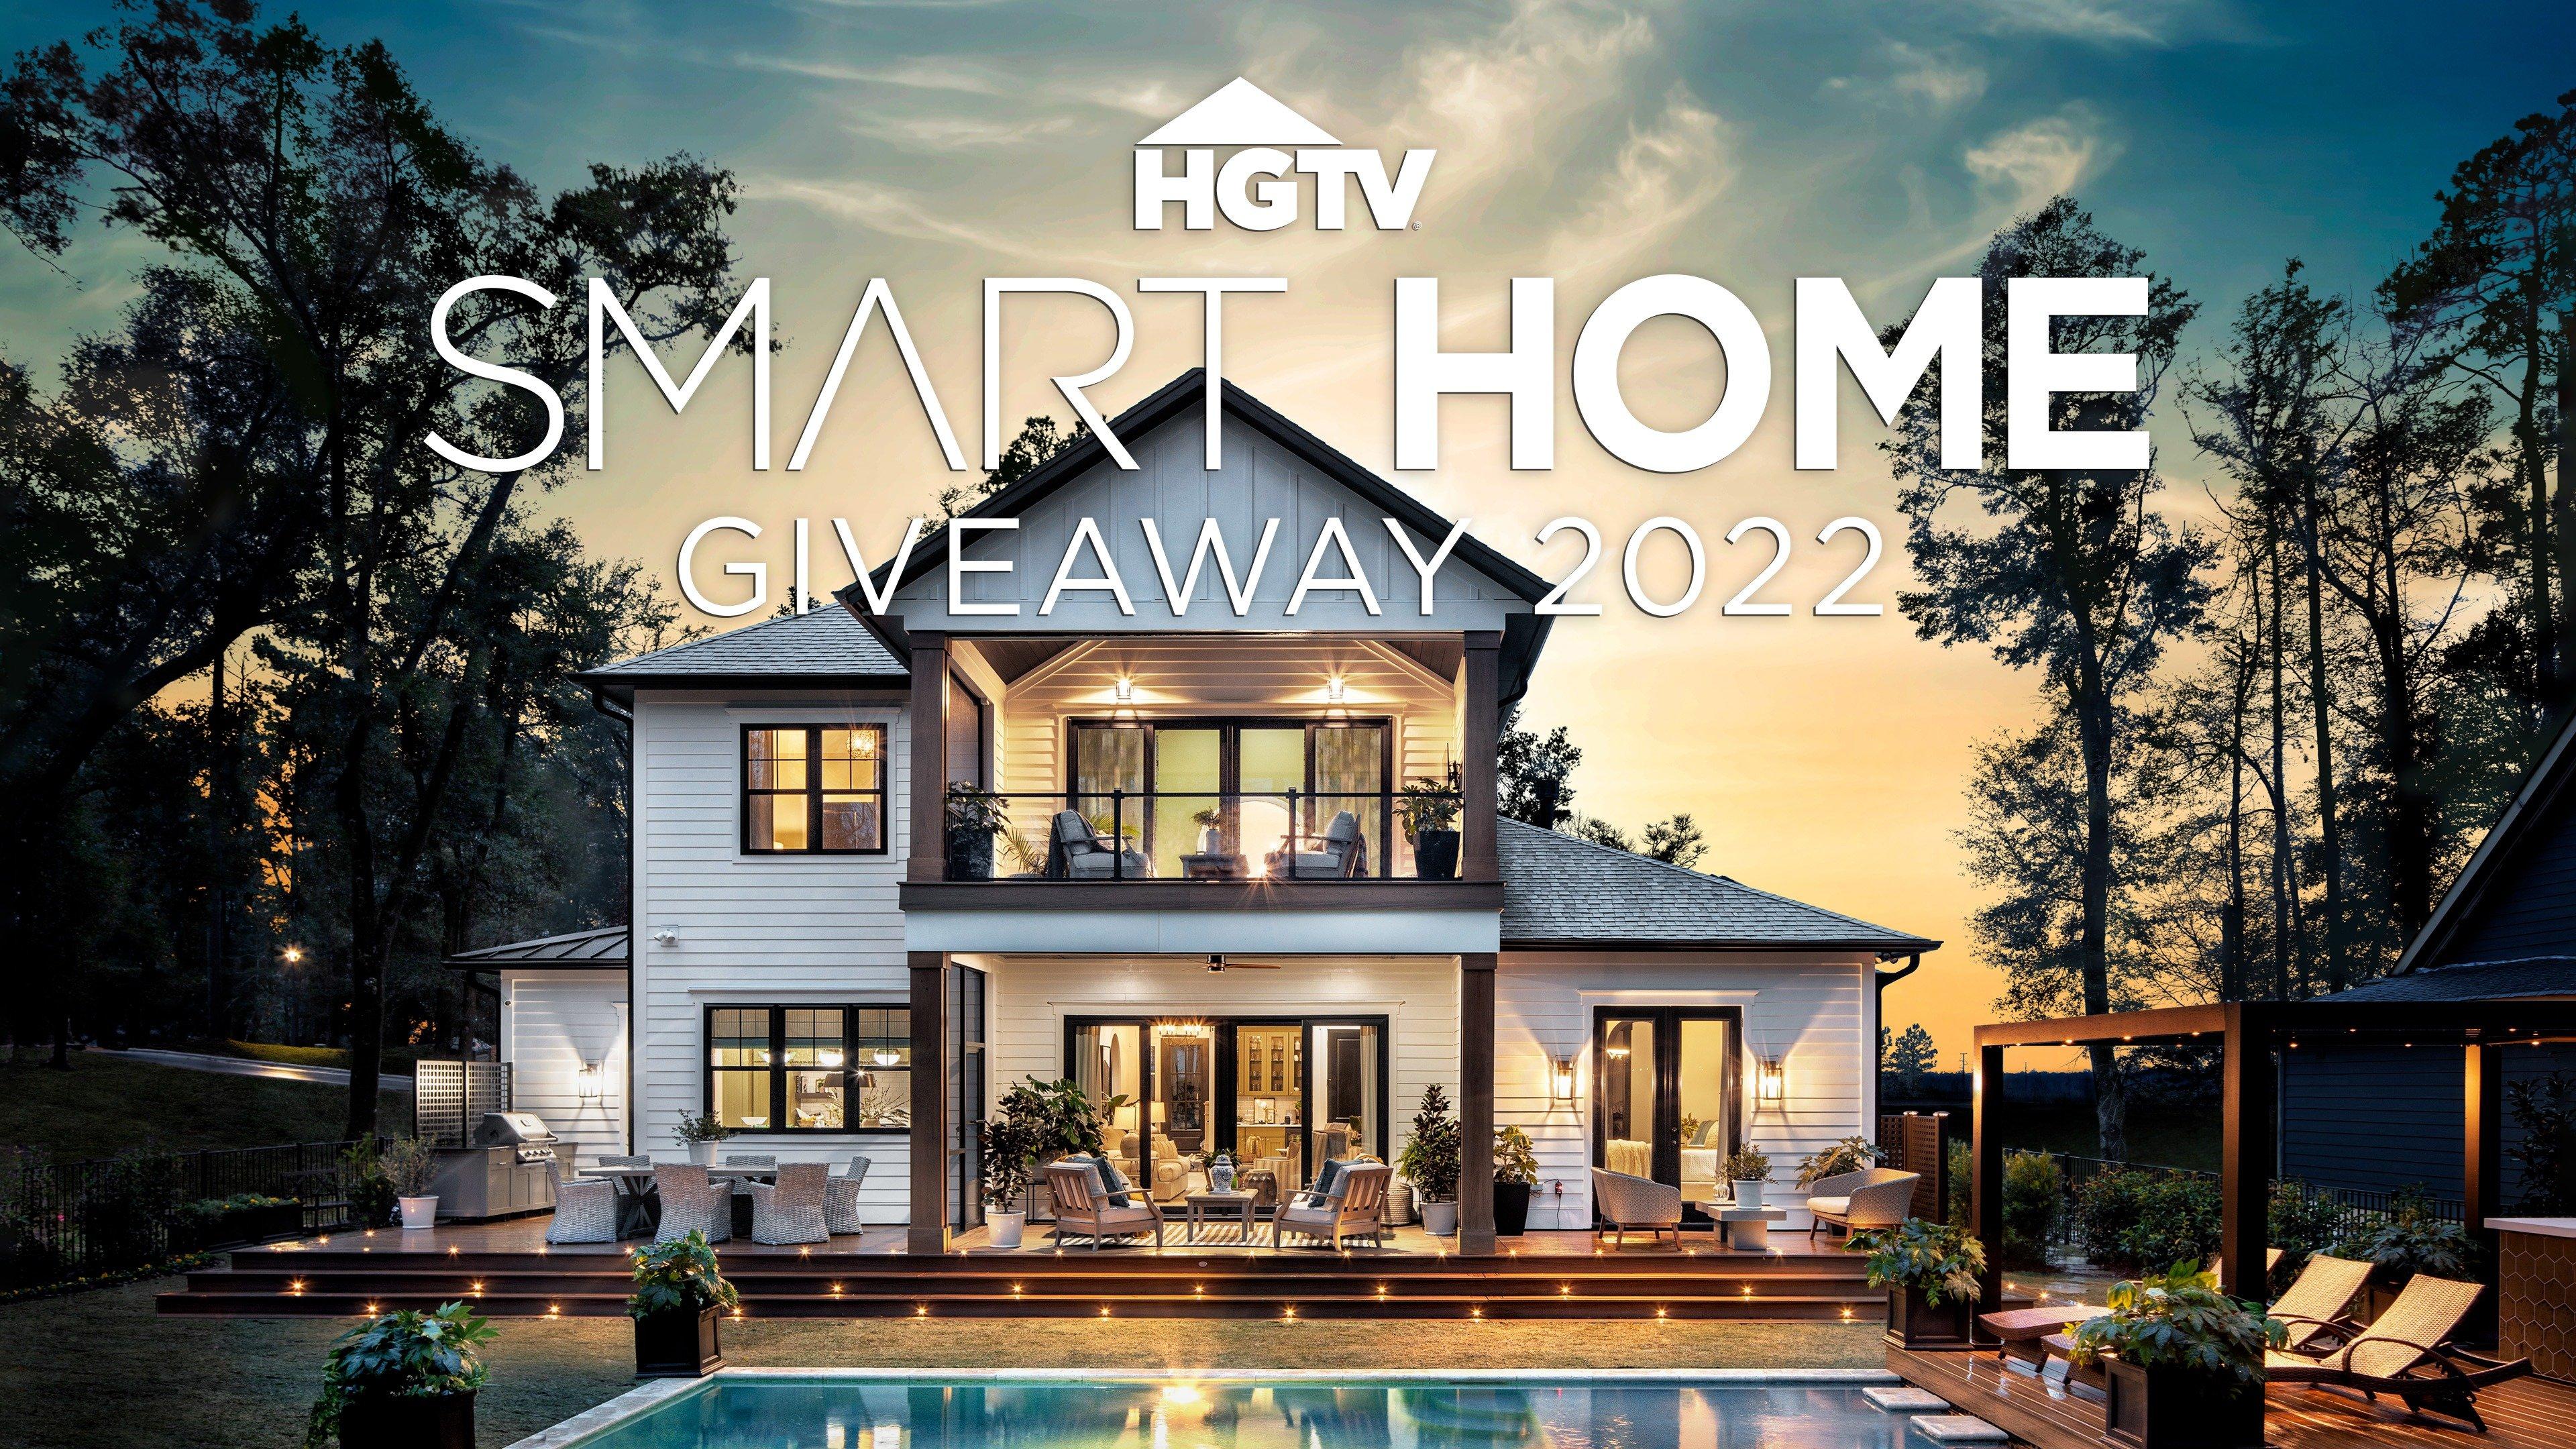 Watch HGTV Smart Home Giveaway 2022 Streaming Online on Philo (Free Trial)